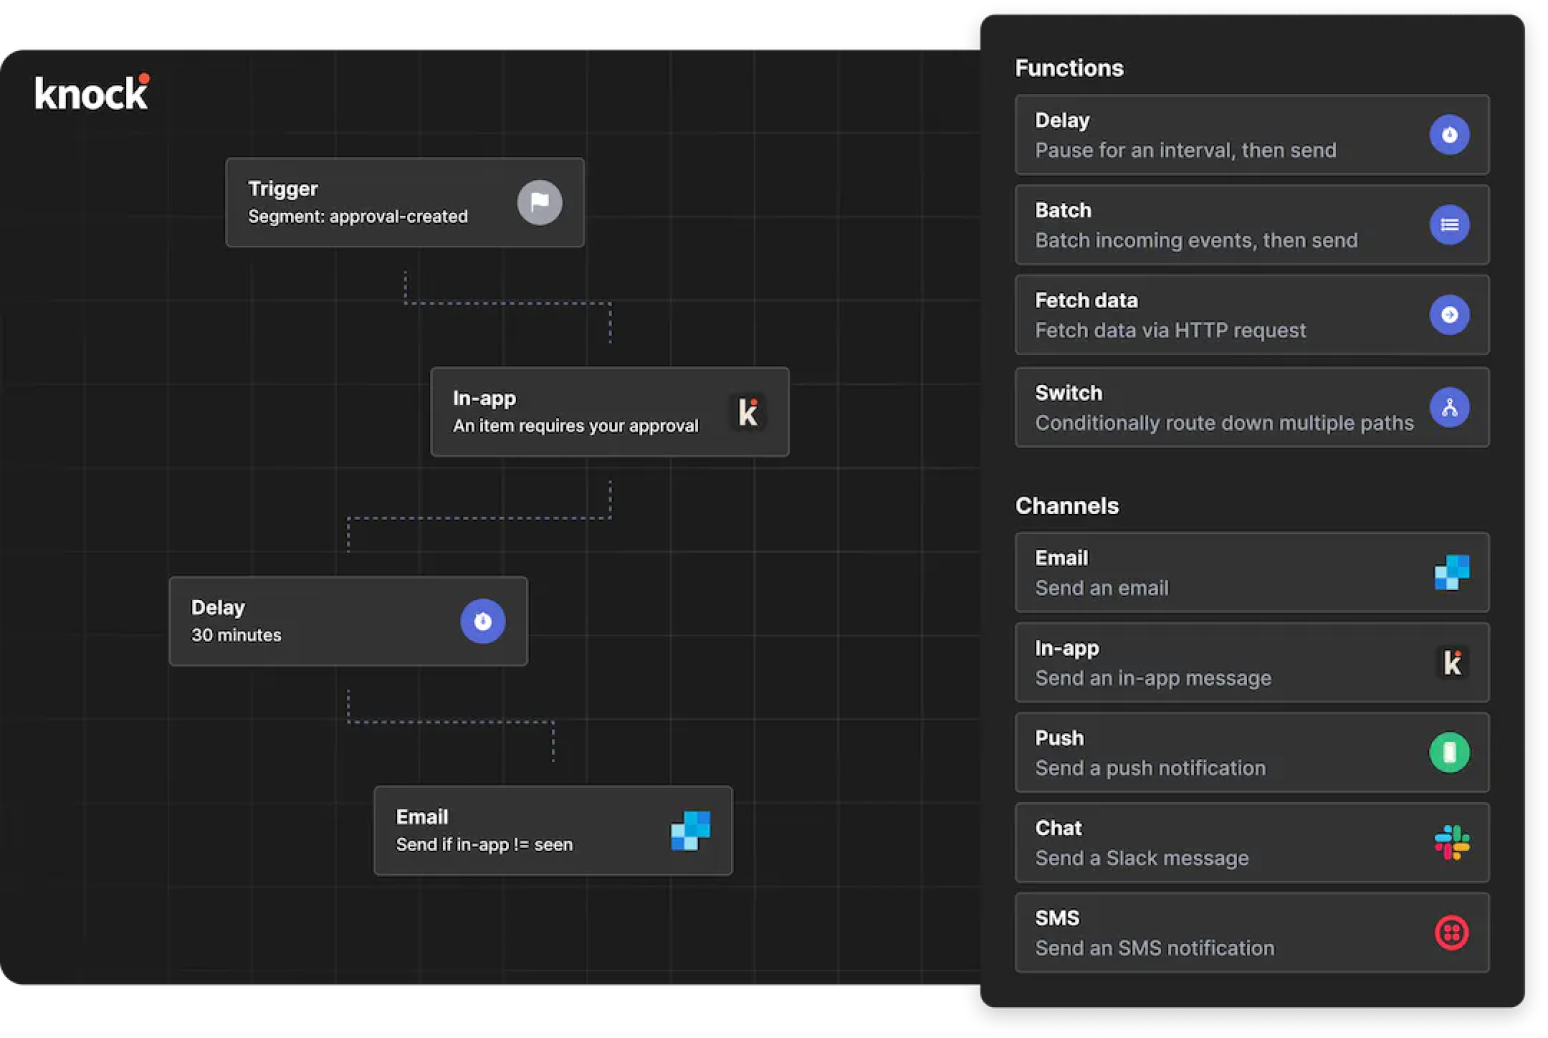 Knock allows you to build cross-channel notifications with easy-to-use workflows.